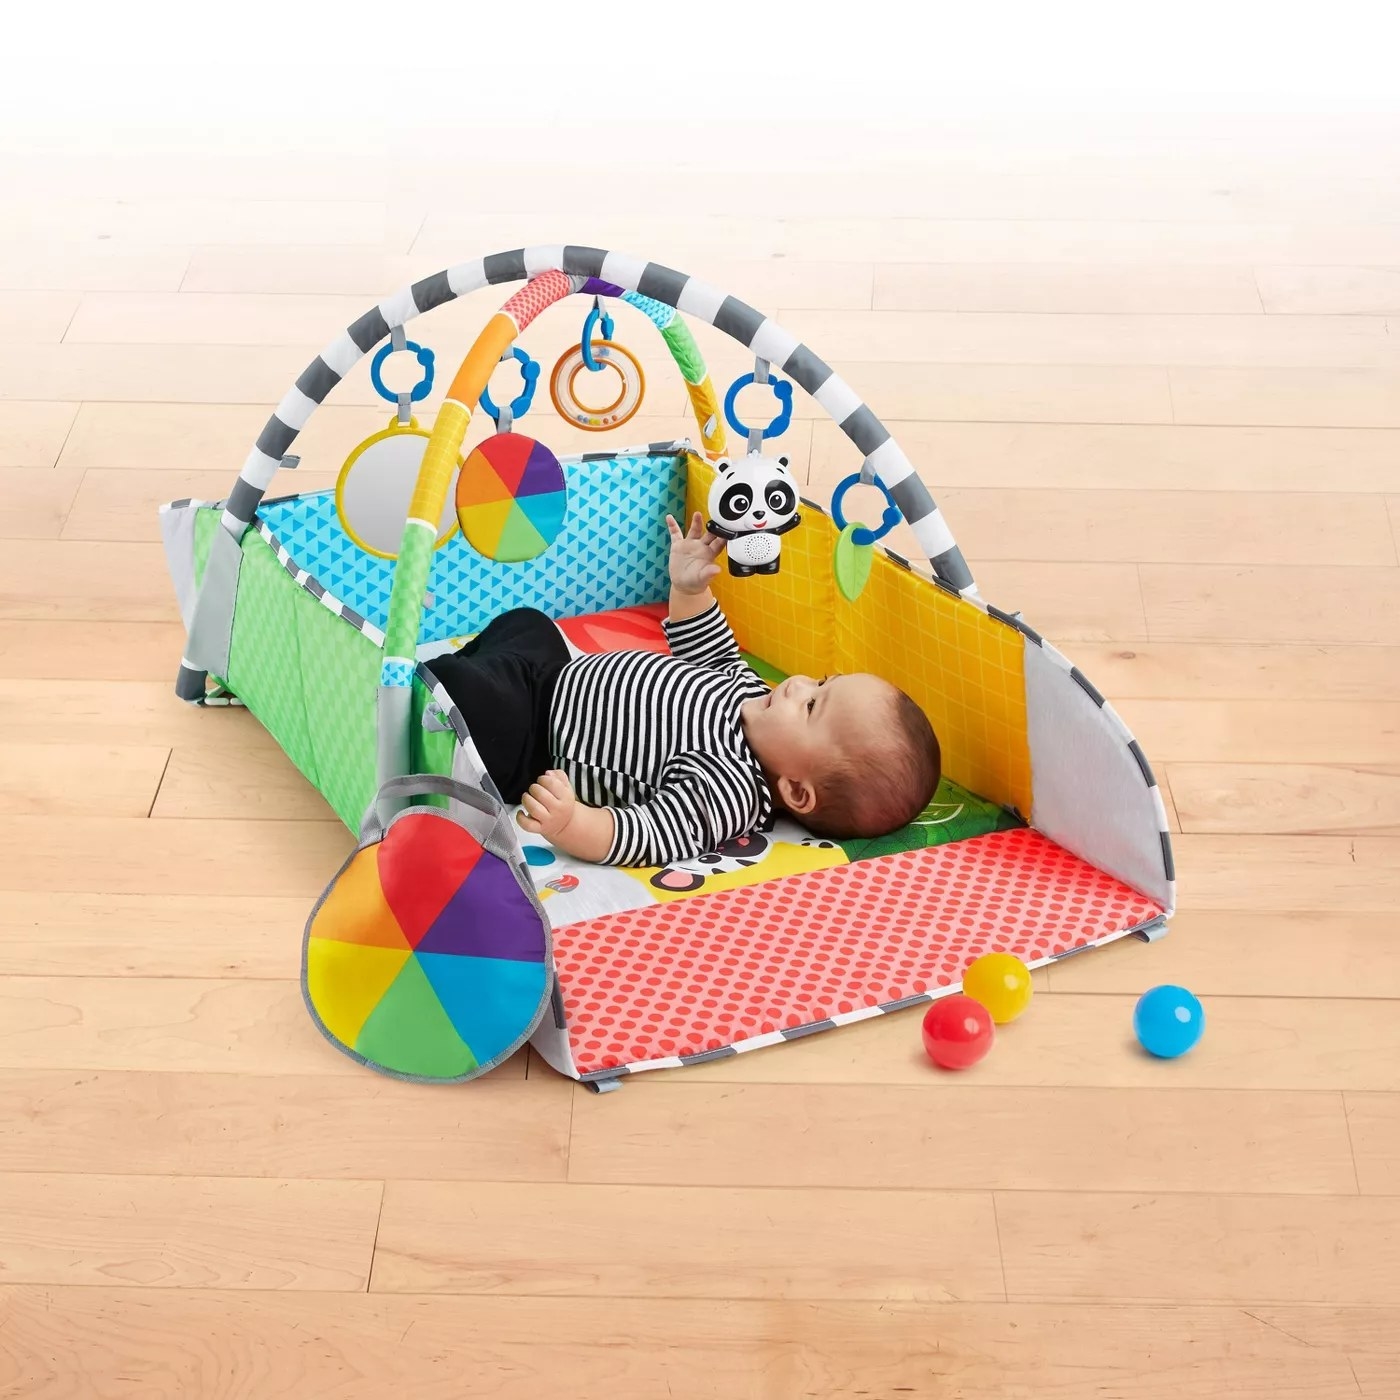 A baby playing with the hanging toys on the play gym